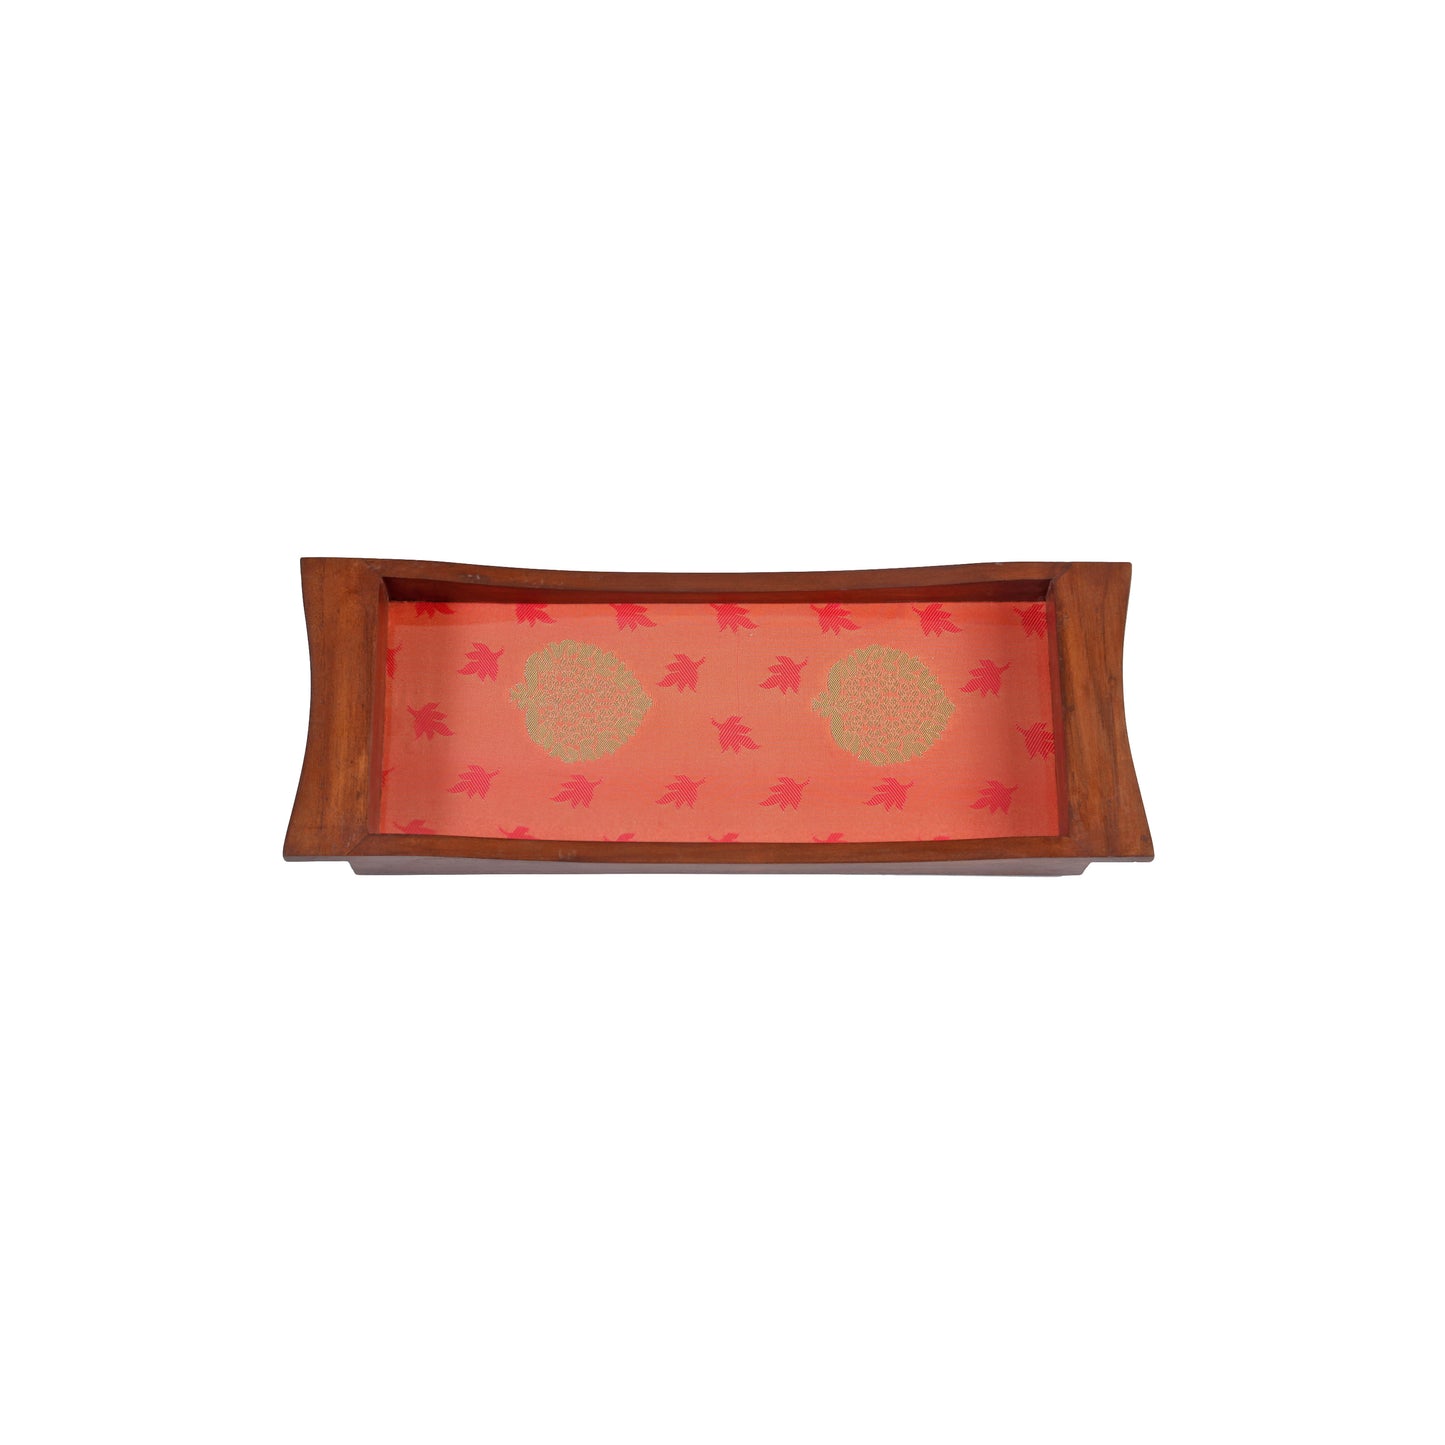 A Tiny Mistake Elegant Orange Brocade Boat Shaped Teak Serving Tray, Tray for Serving Tea and Snacks, 35 x 15 x 4 cm